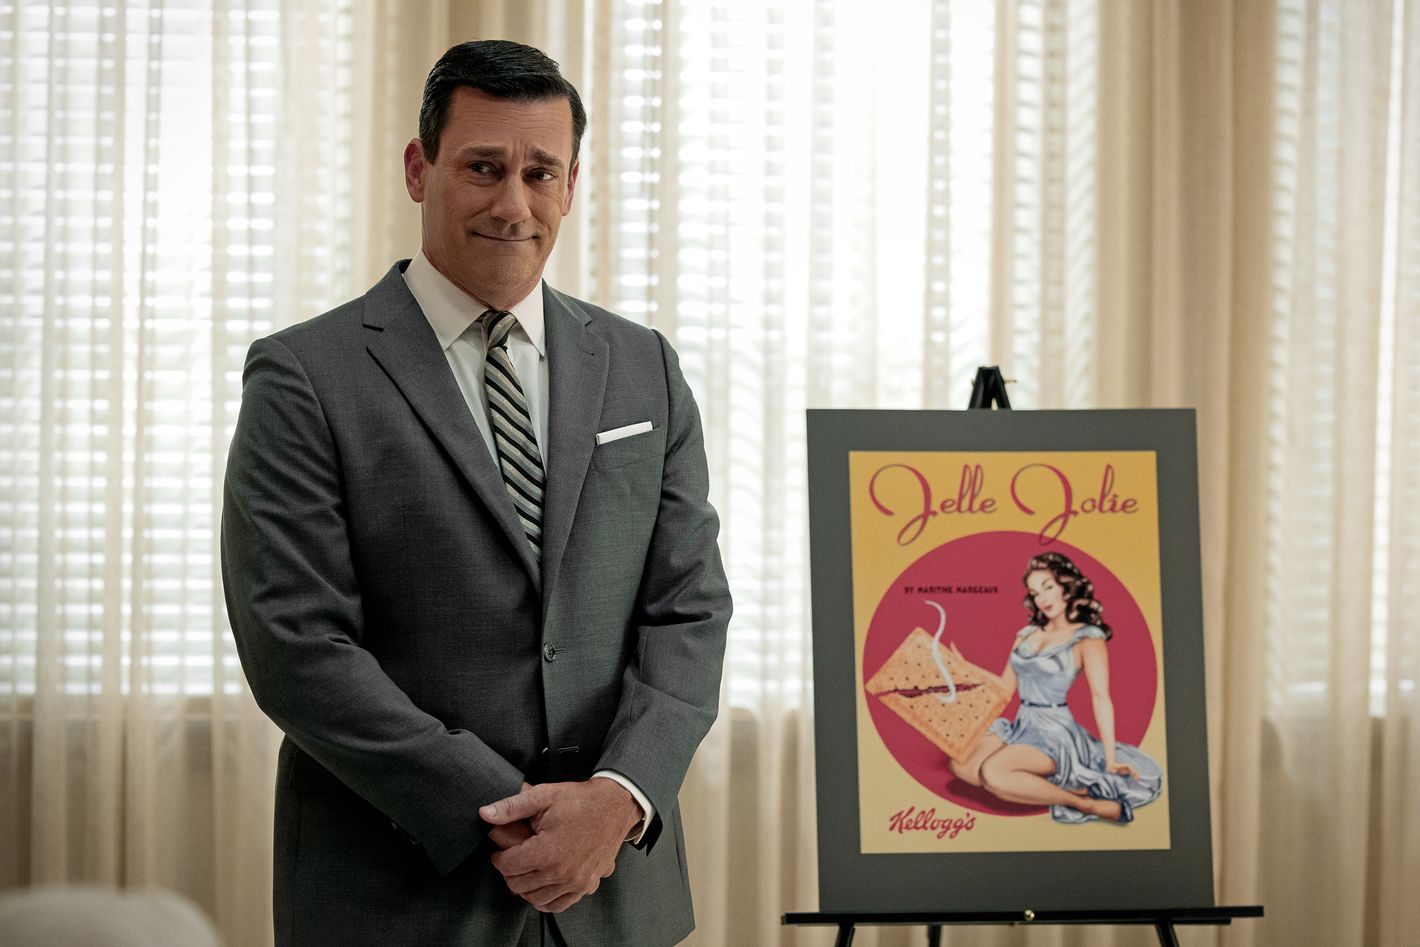 The Random Mad Men Cameos Are the Best Part of Unfrosted